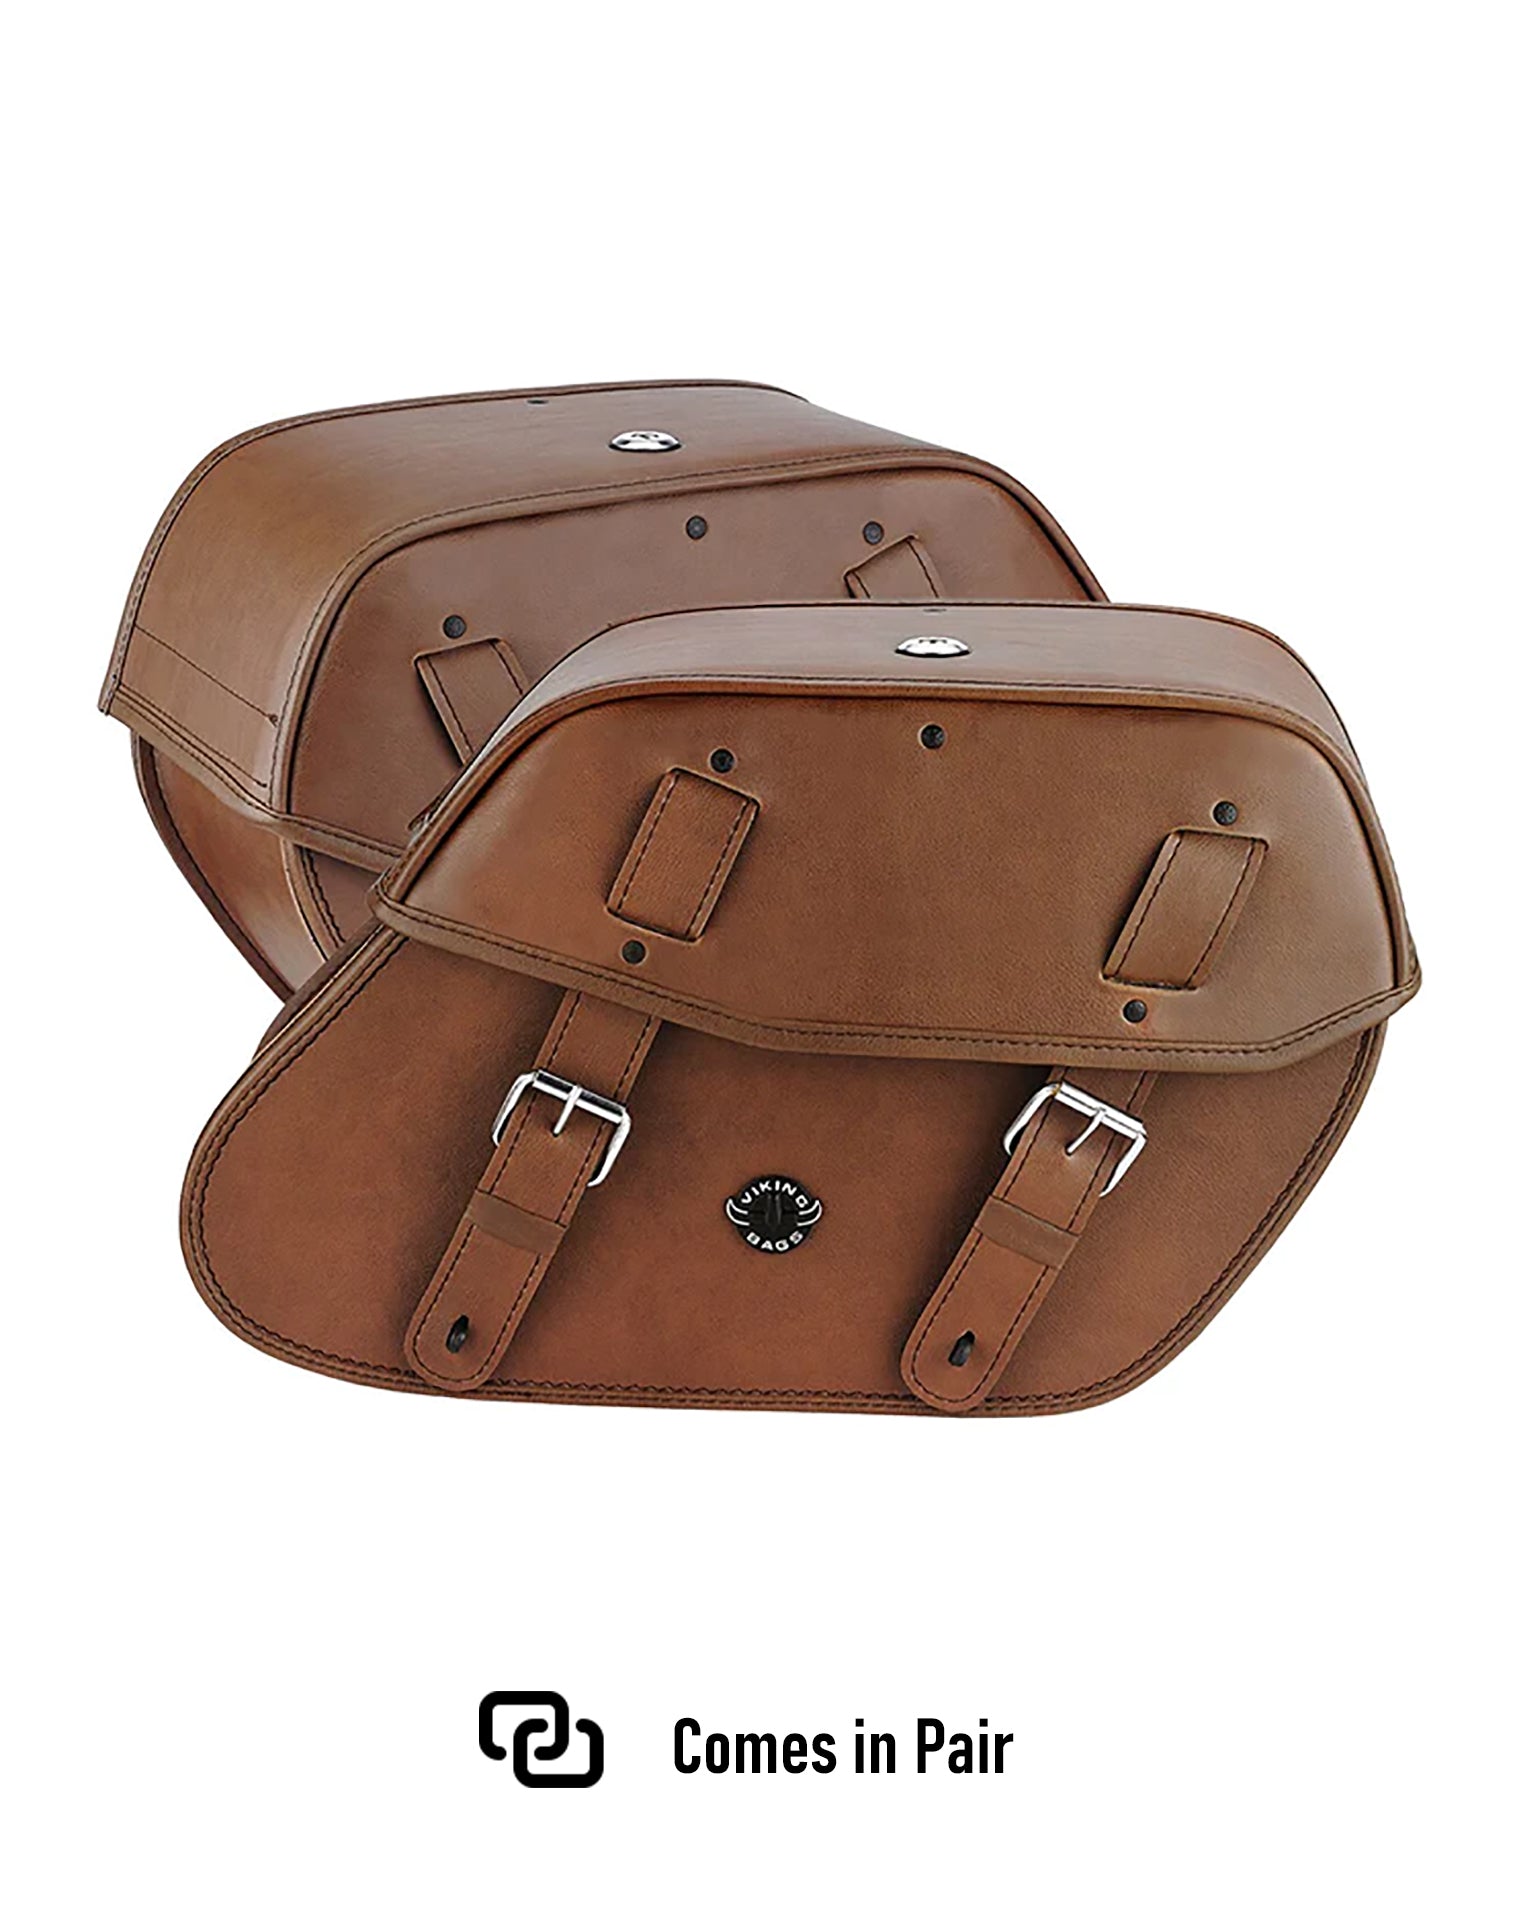 Viking Odin Brown Large Suzuki Boulevard M90 Vz1500 Leather Motorcycle Saddlebags Weather Resistant Bags Comes in Pair